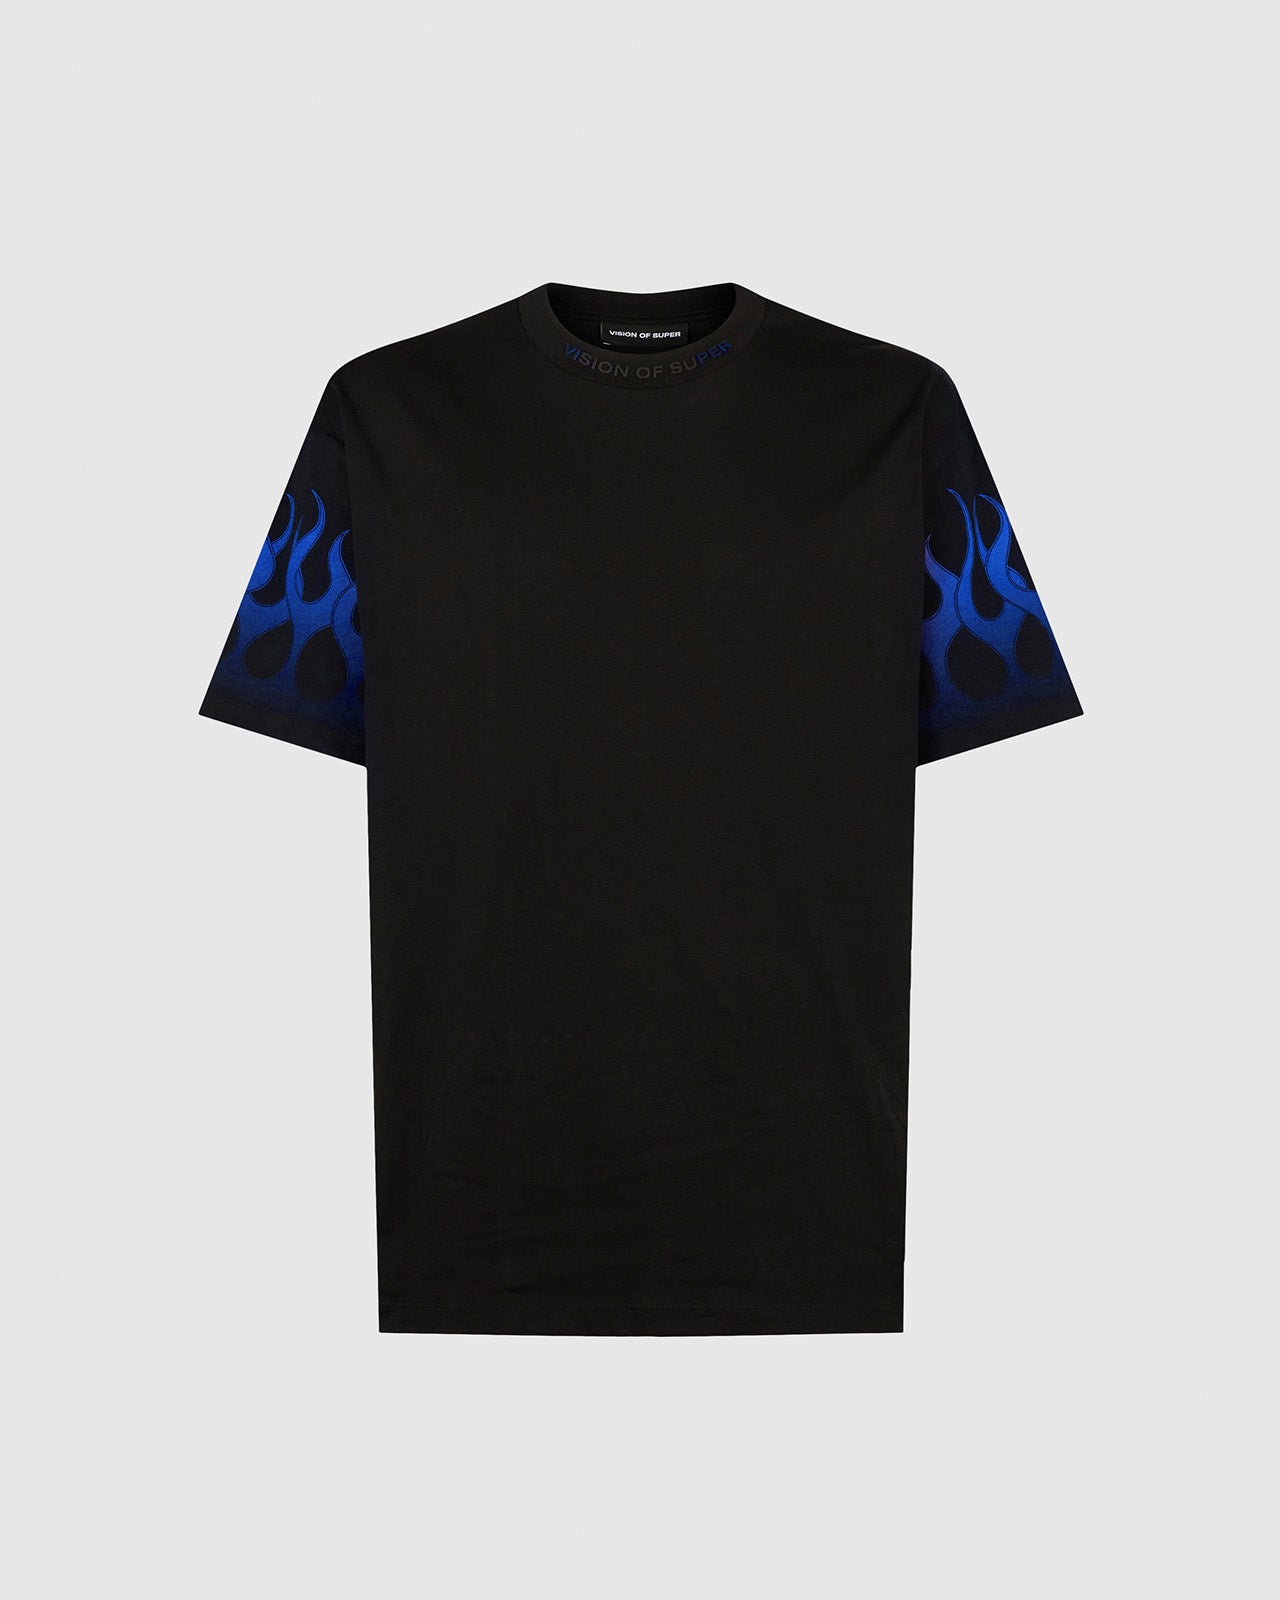 Black T-shirt with Blue Flames